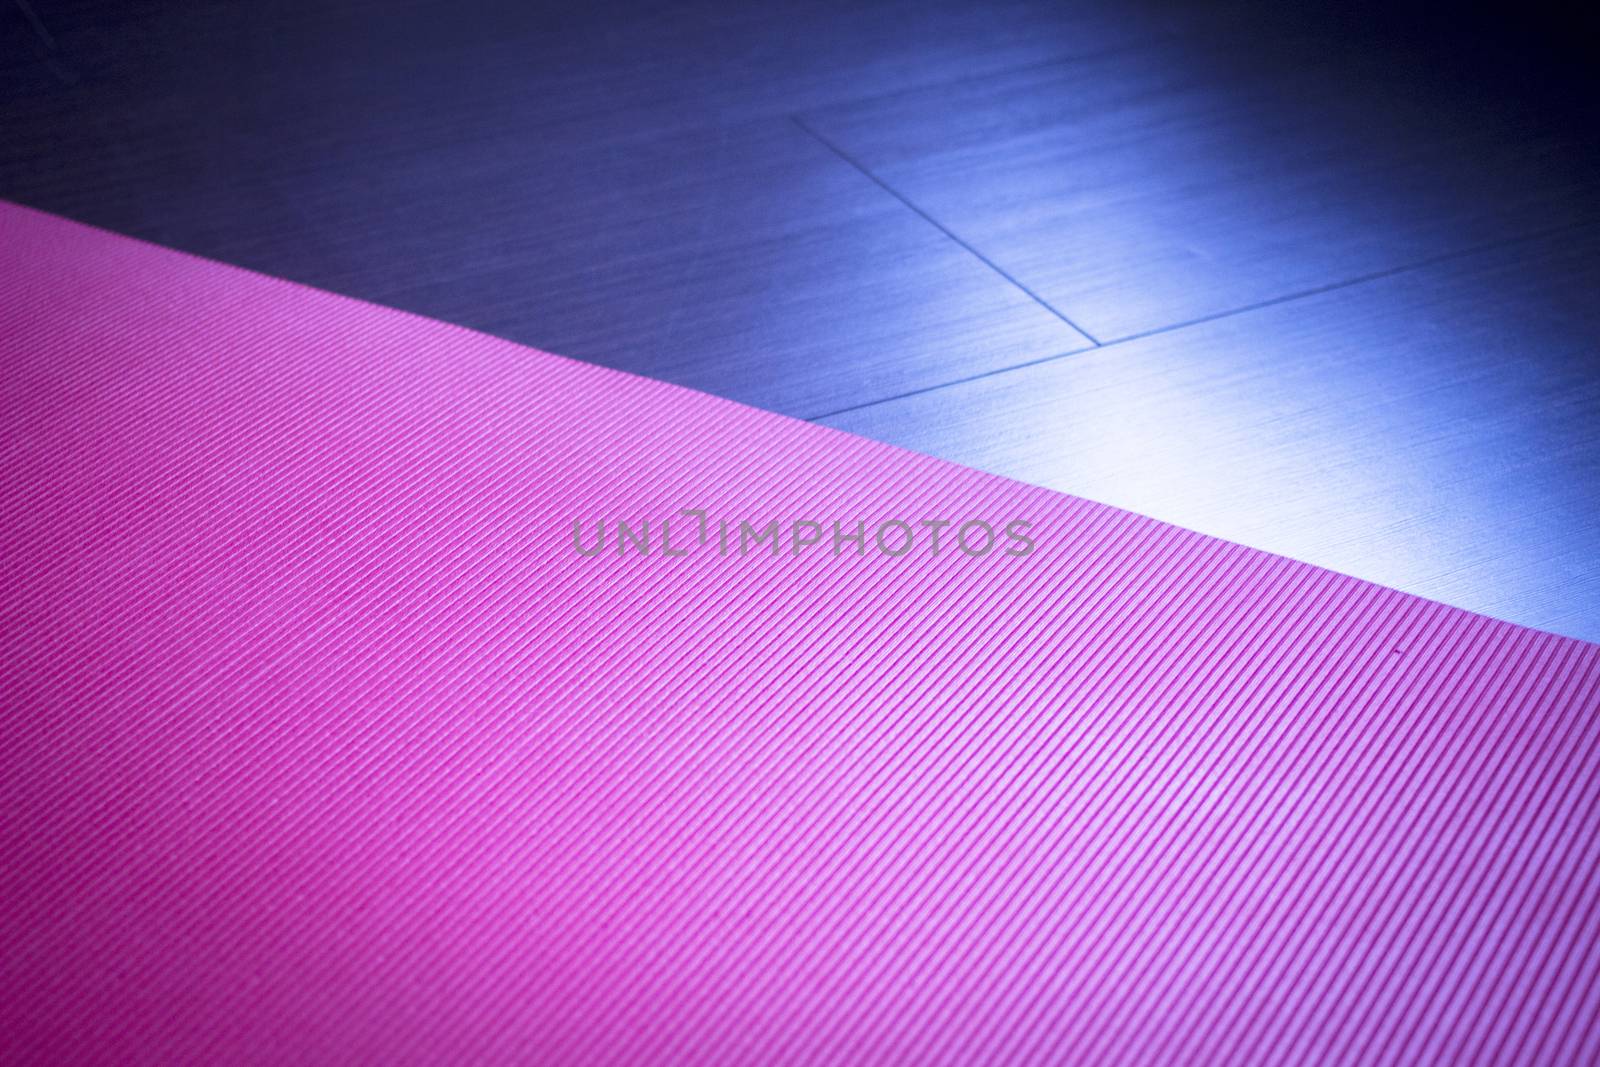 Red fitness yoga and pilates foam gym mats by edwardolive